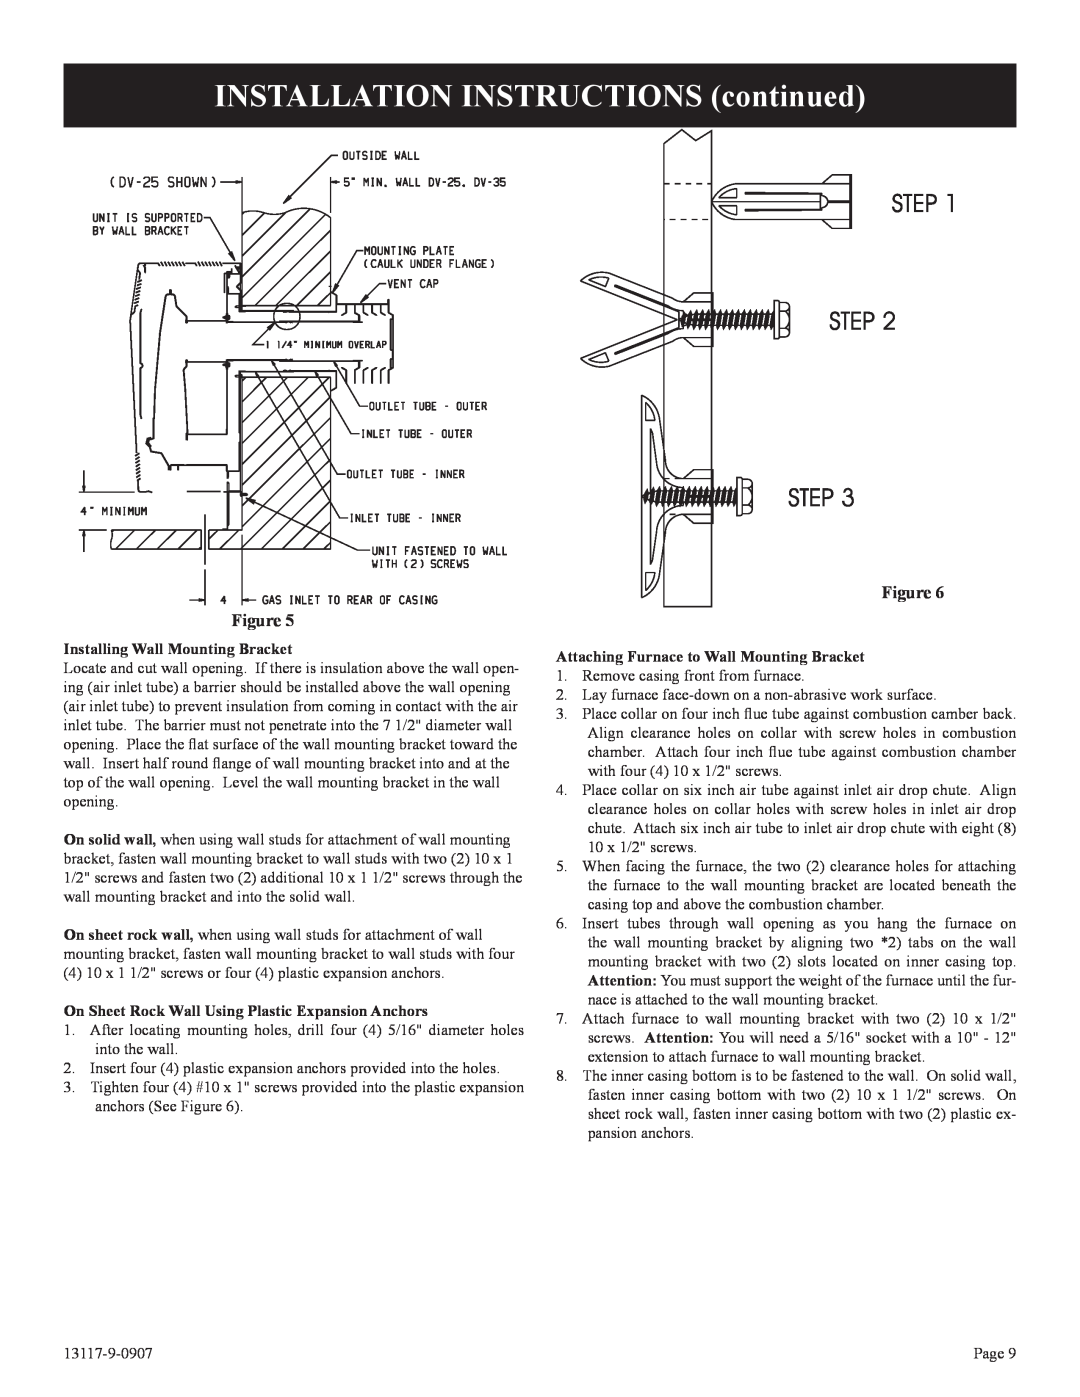 Empire Products DV-25T-1, DV-35T-1 INSTALLATION INSTRUCTIONS continued, Installing Wall Mounting Bracket 